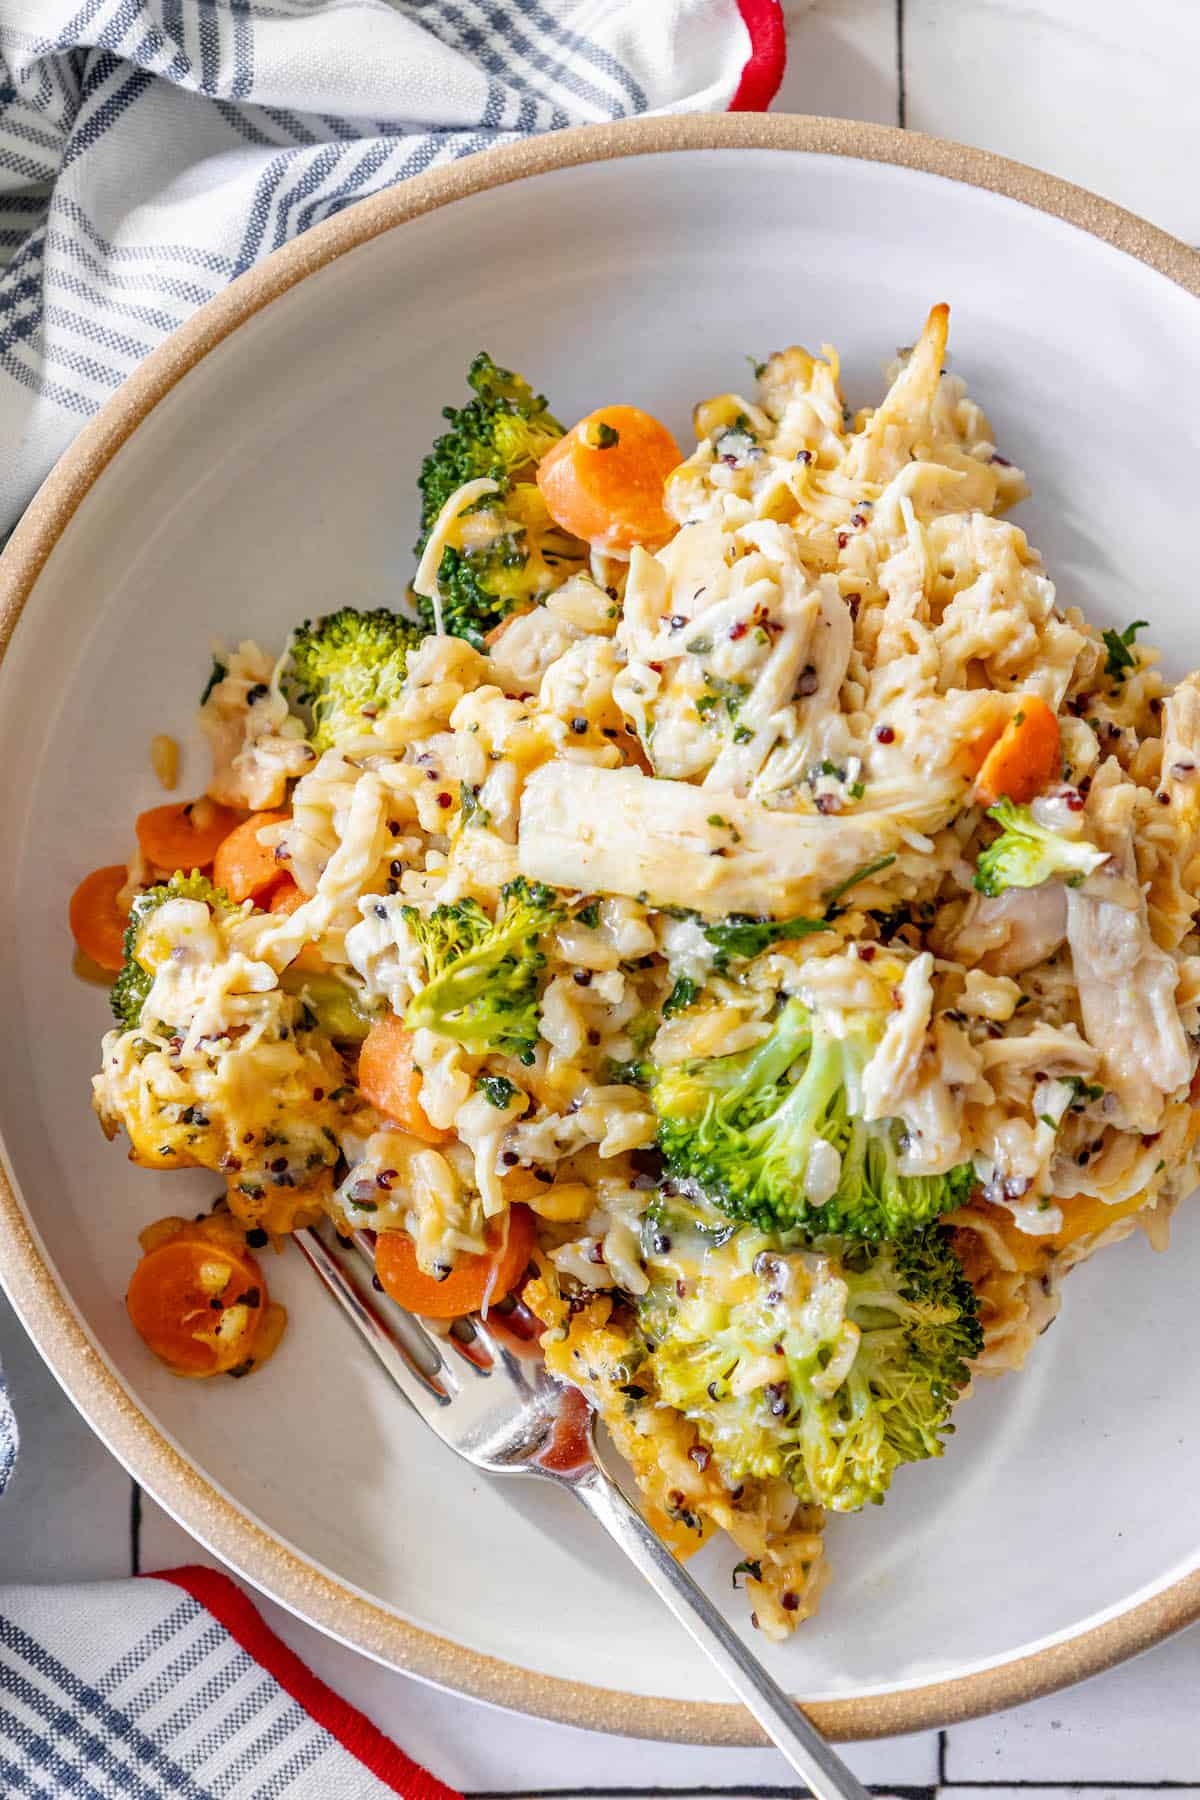 A plate with chicken, broccoli and carrots on it.